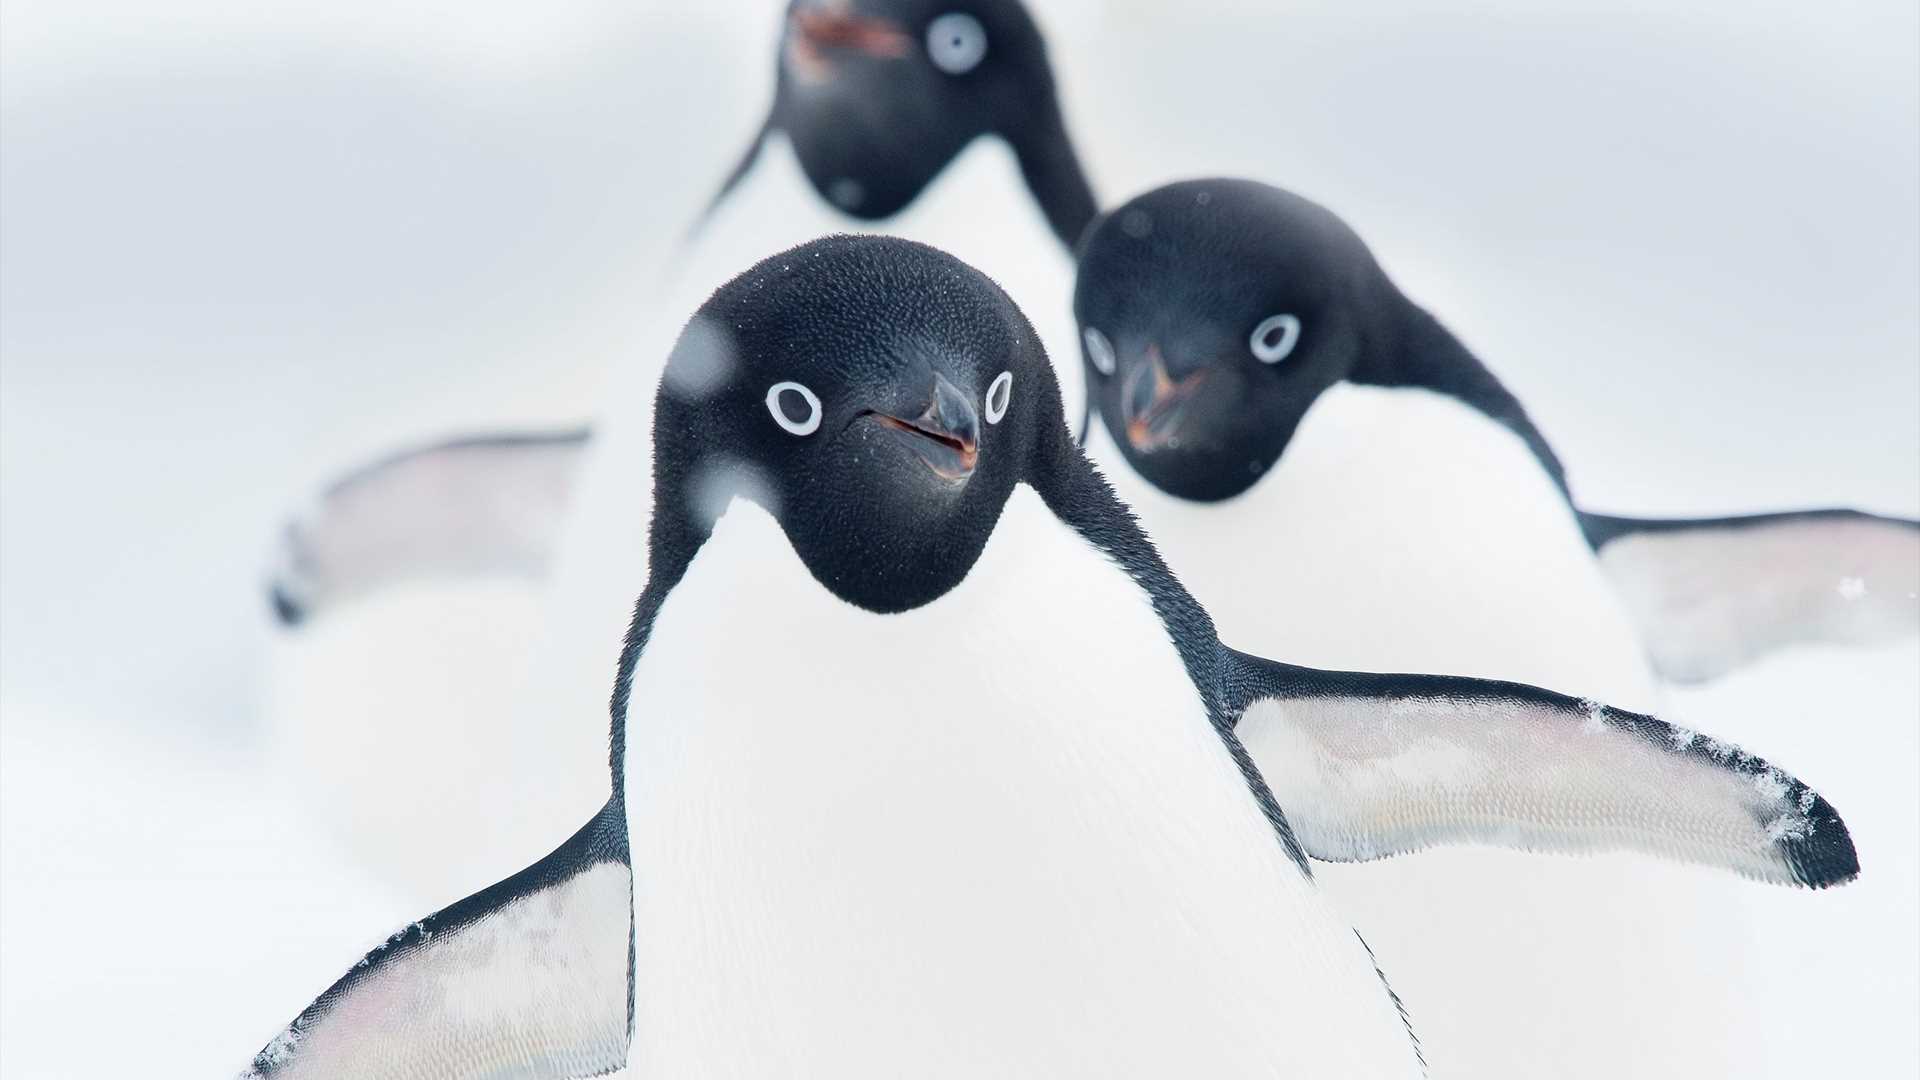 https://cdn.expeditions.com/globalassets/expedition-stories/meet-the-elite-8-penguins-of-the-southern-ocean/meet_the_elite_no_type_hero_short_4096x1420.jpg?width=1920&height=1080&mode=crop&scale=none&quality=50